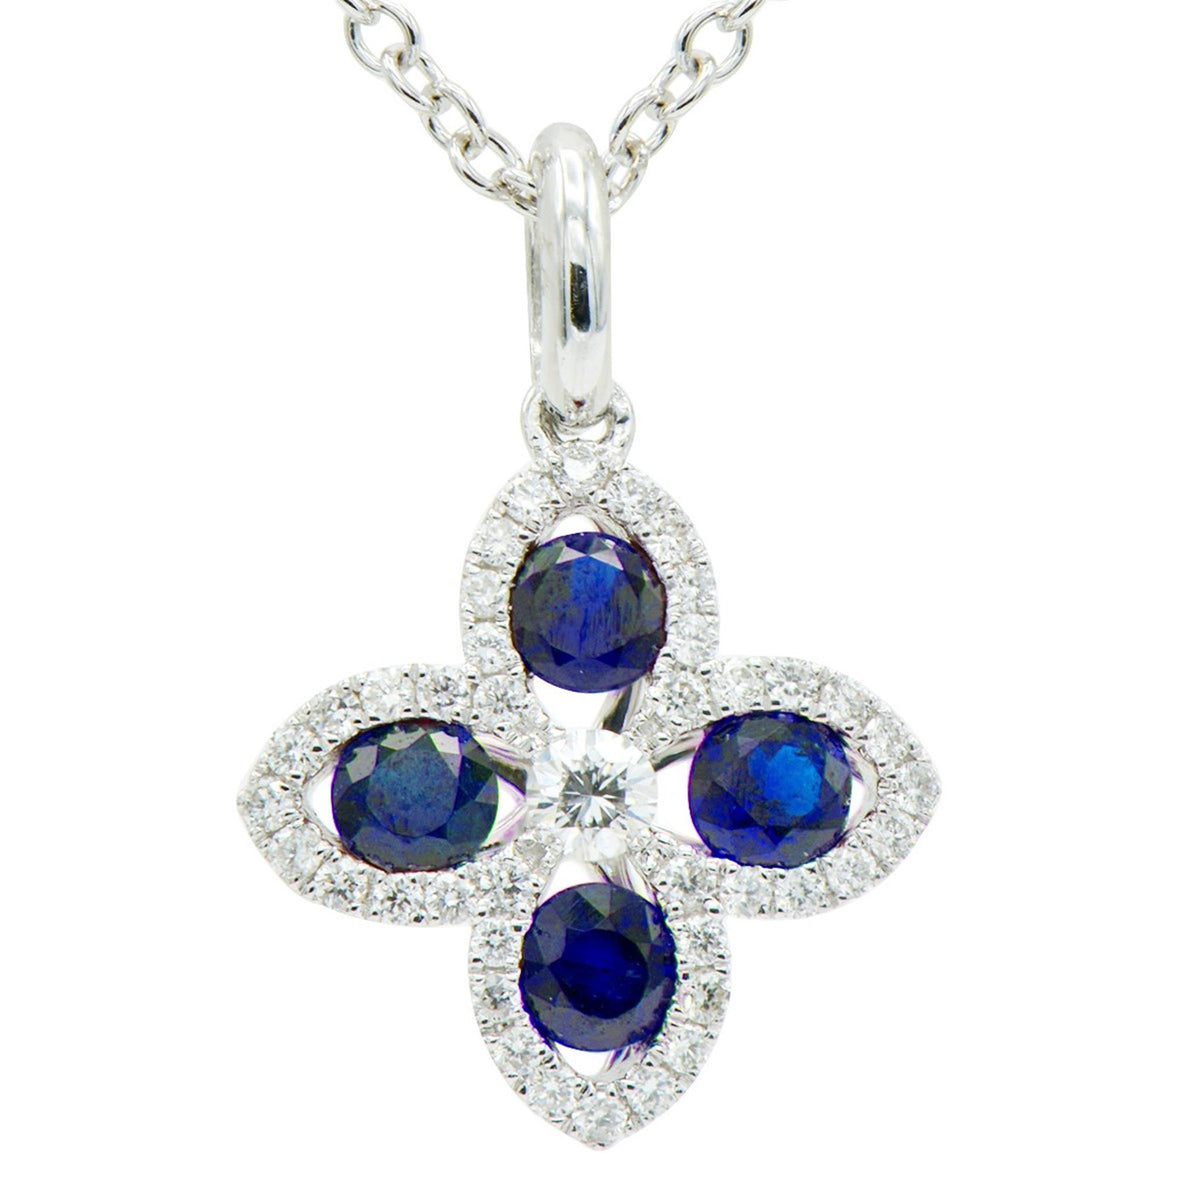 14Kt White Gold Floral Gemstone Pendant With 0.83ct Sapphires